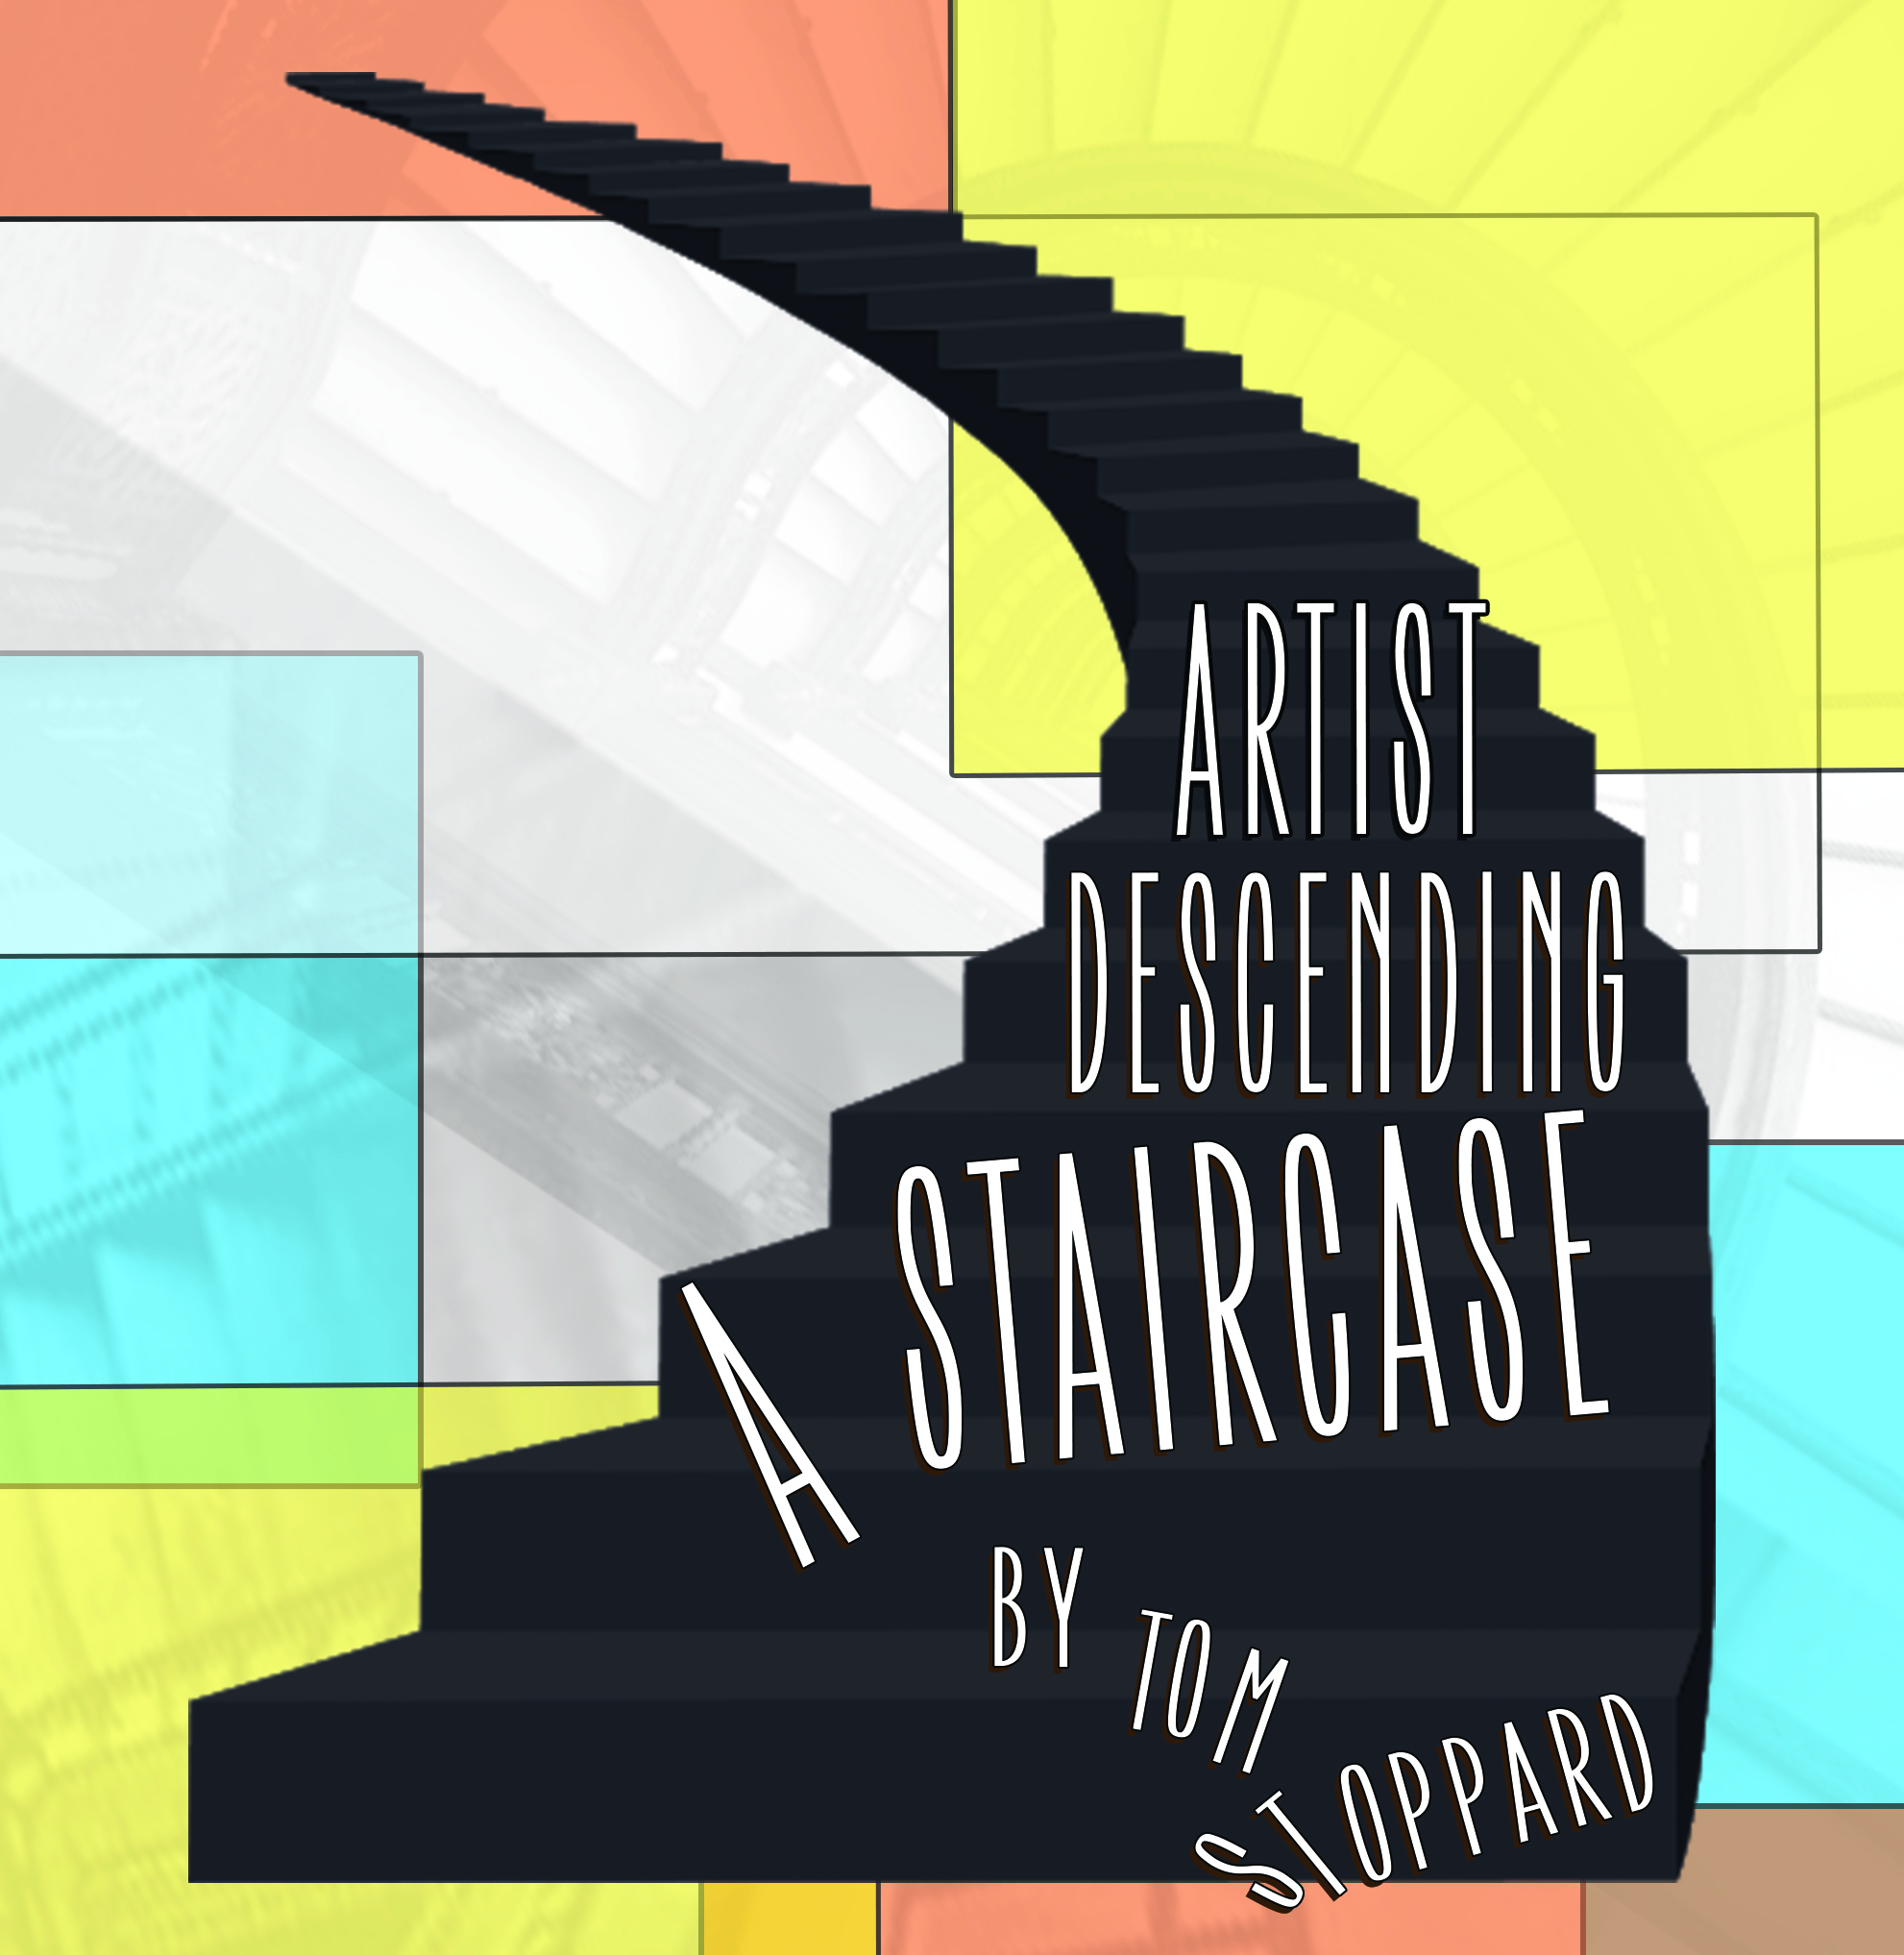 Text that reads Artist Descending a Staircase by Tom Stoppard on top of a black staircase with blue, yellow and red opaque squares surrounding it.